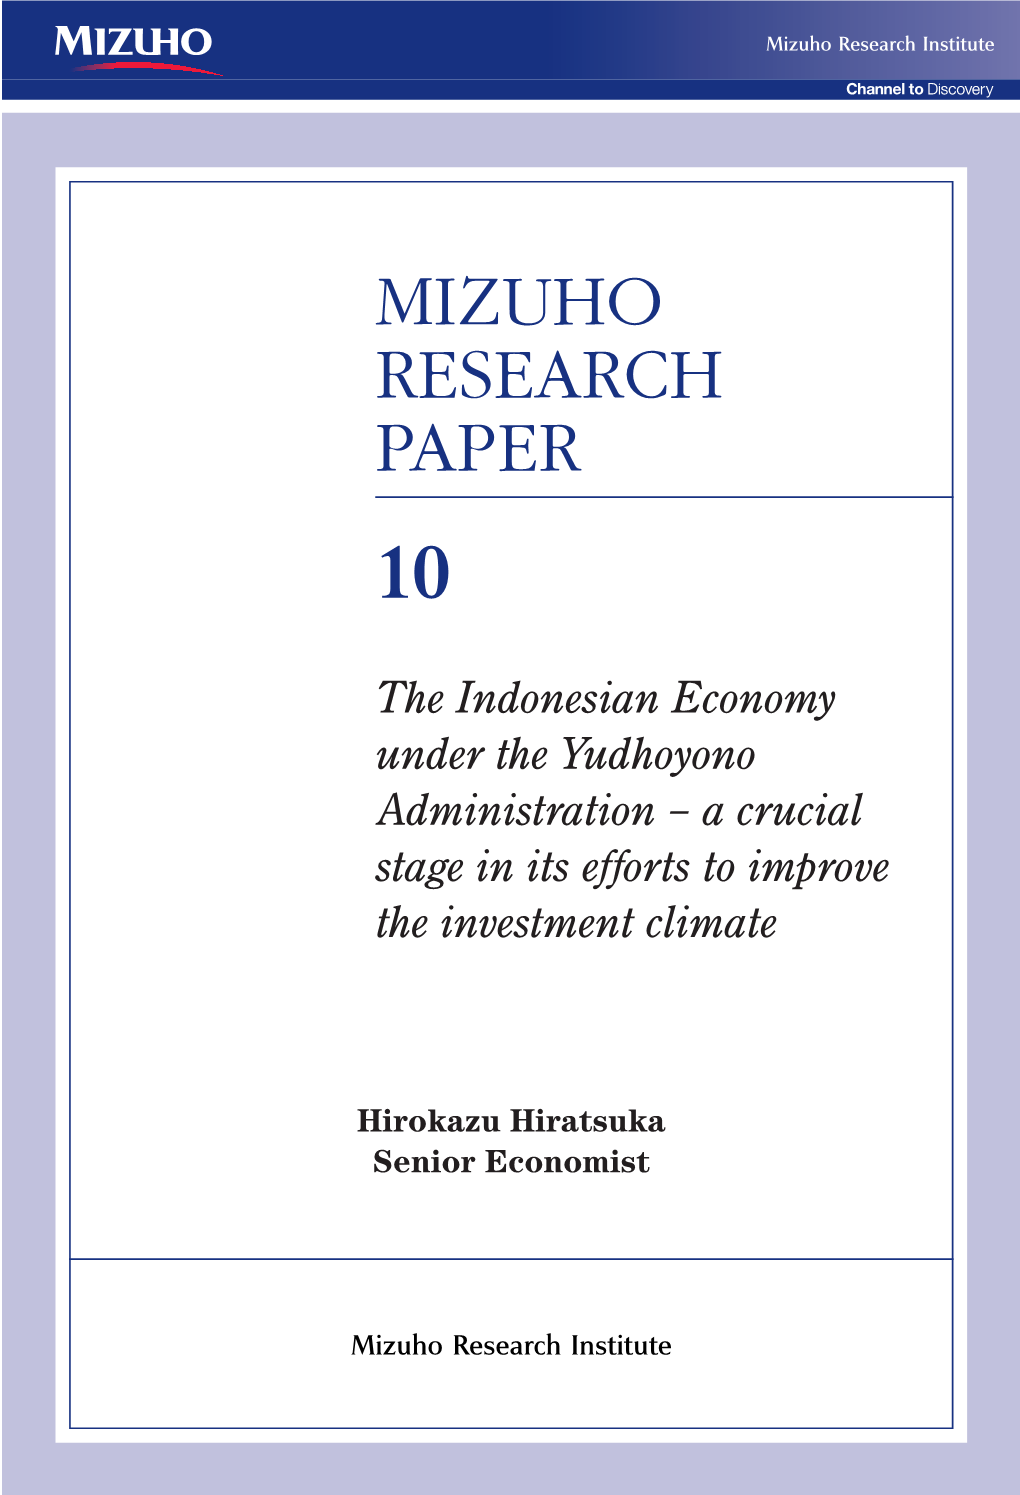 Mizuho Research Paper 10